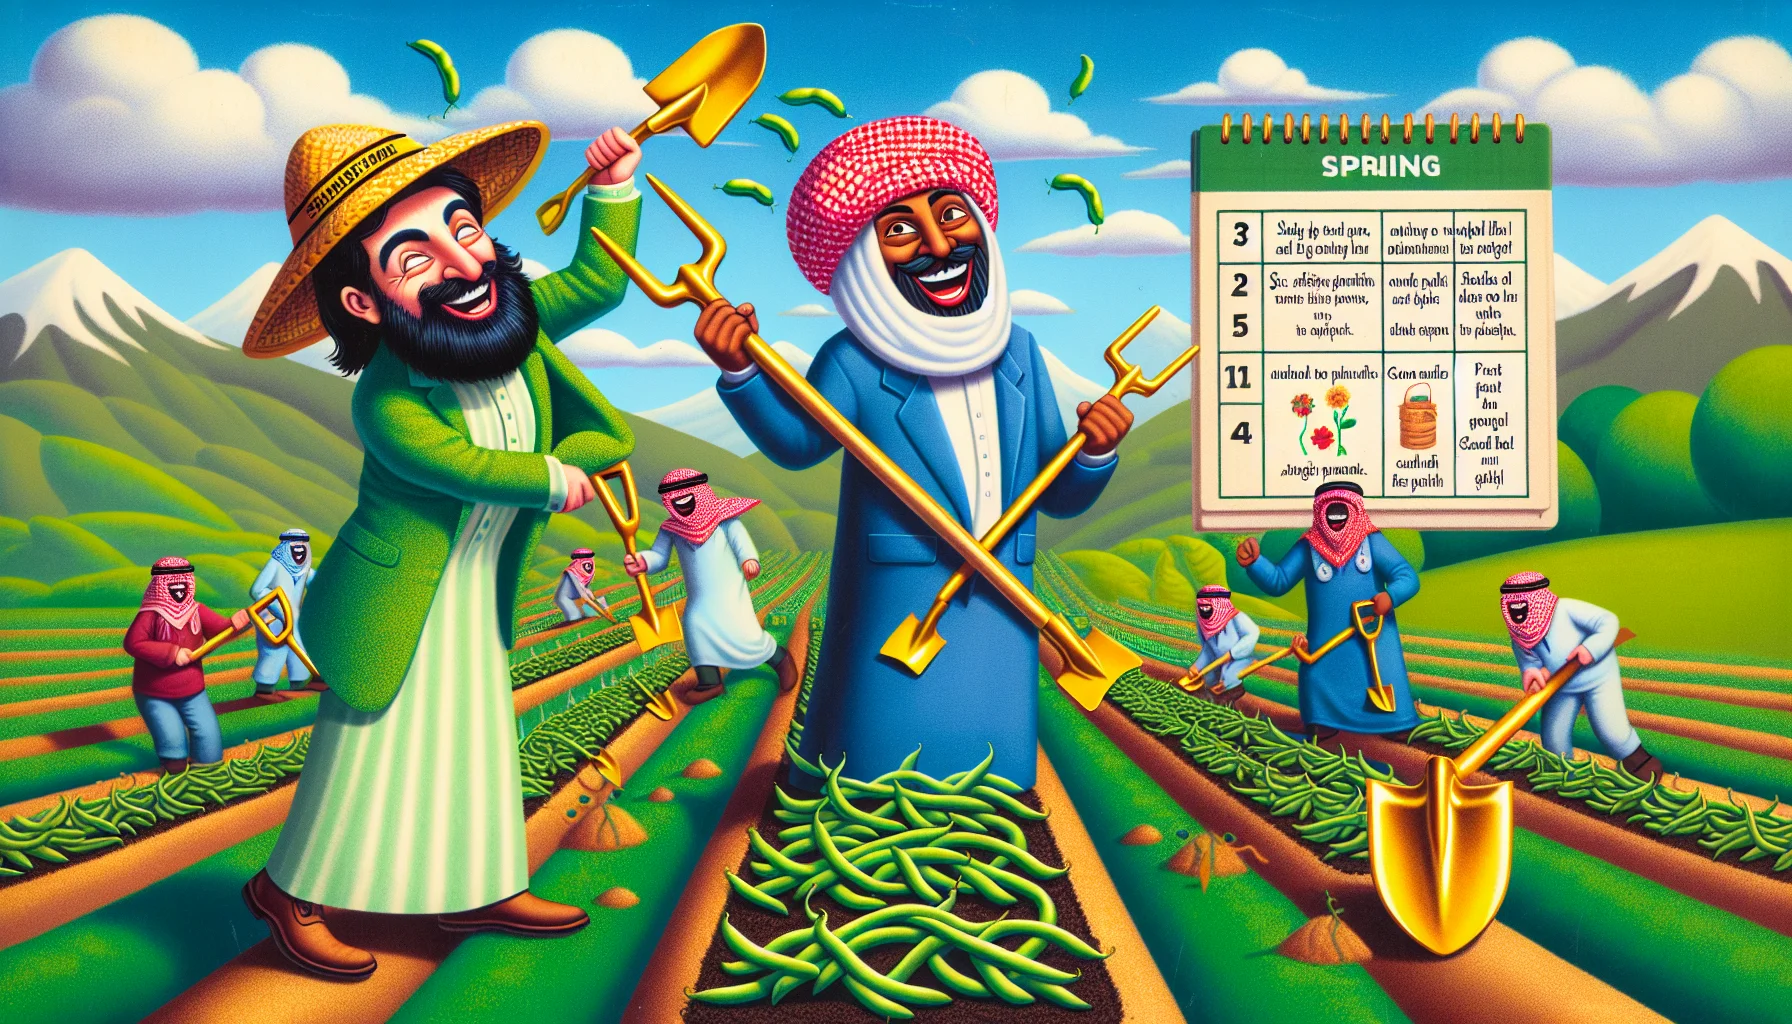 Imagine an amusing scene of bush beans gardening portrayed as a seasonal event. Middle-Eastern man and Caucasian woman with golden shovels on a vibrant green field, humorously racing against each other to plant the beans, while wearing hats labeled 'Spring Planters'. A colorful calendar in the sky with arrow pointing to 'Spring' laughing cheekily. Include annotations with careful details on how and when to plant bush beans in a fun, engaging way to inspire people to take pleasure in gardening.